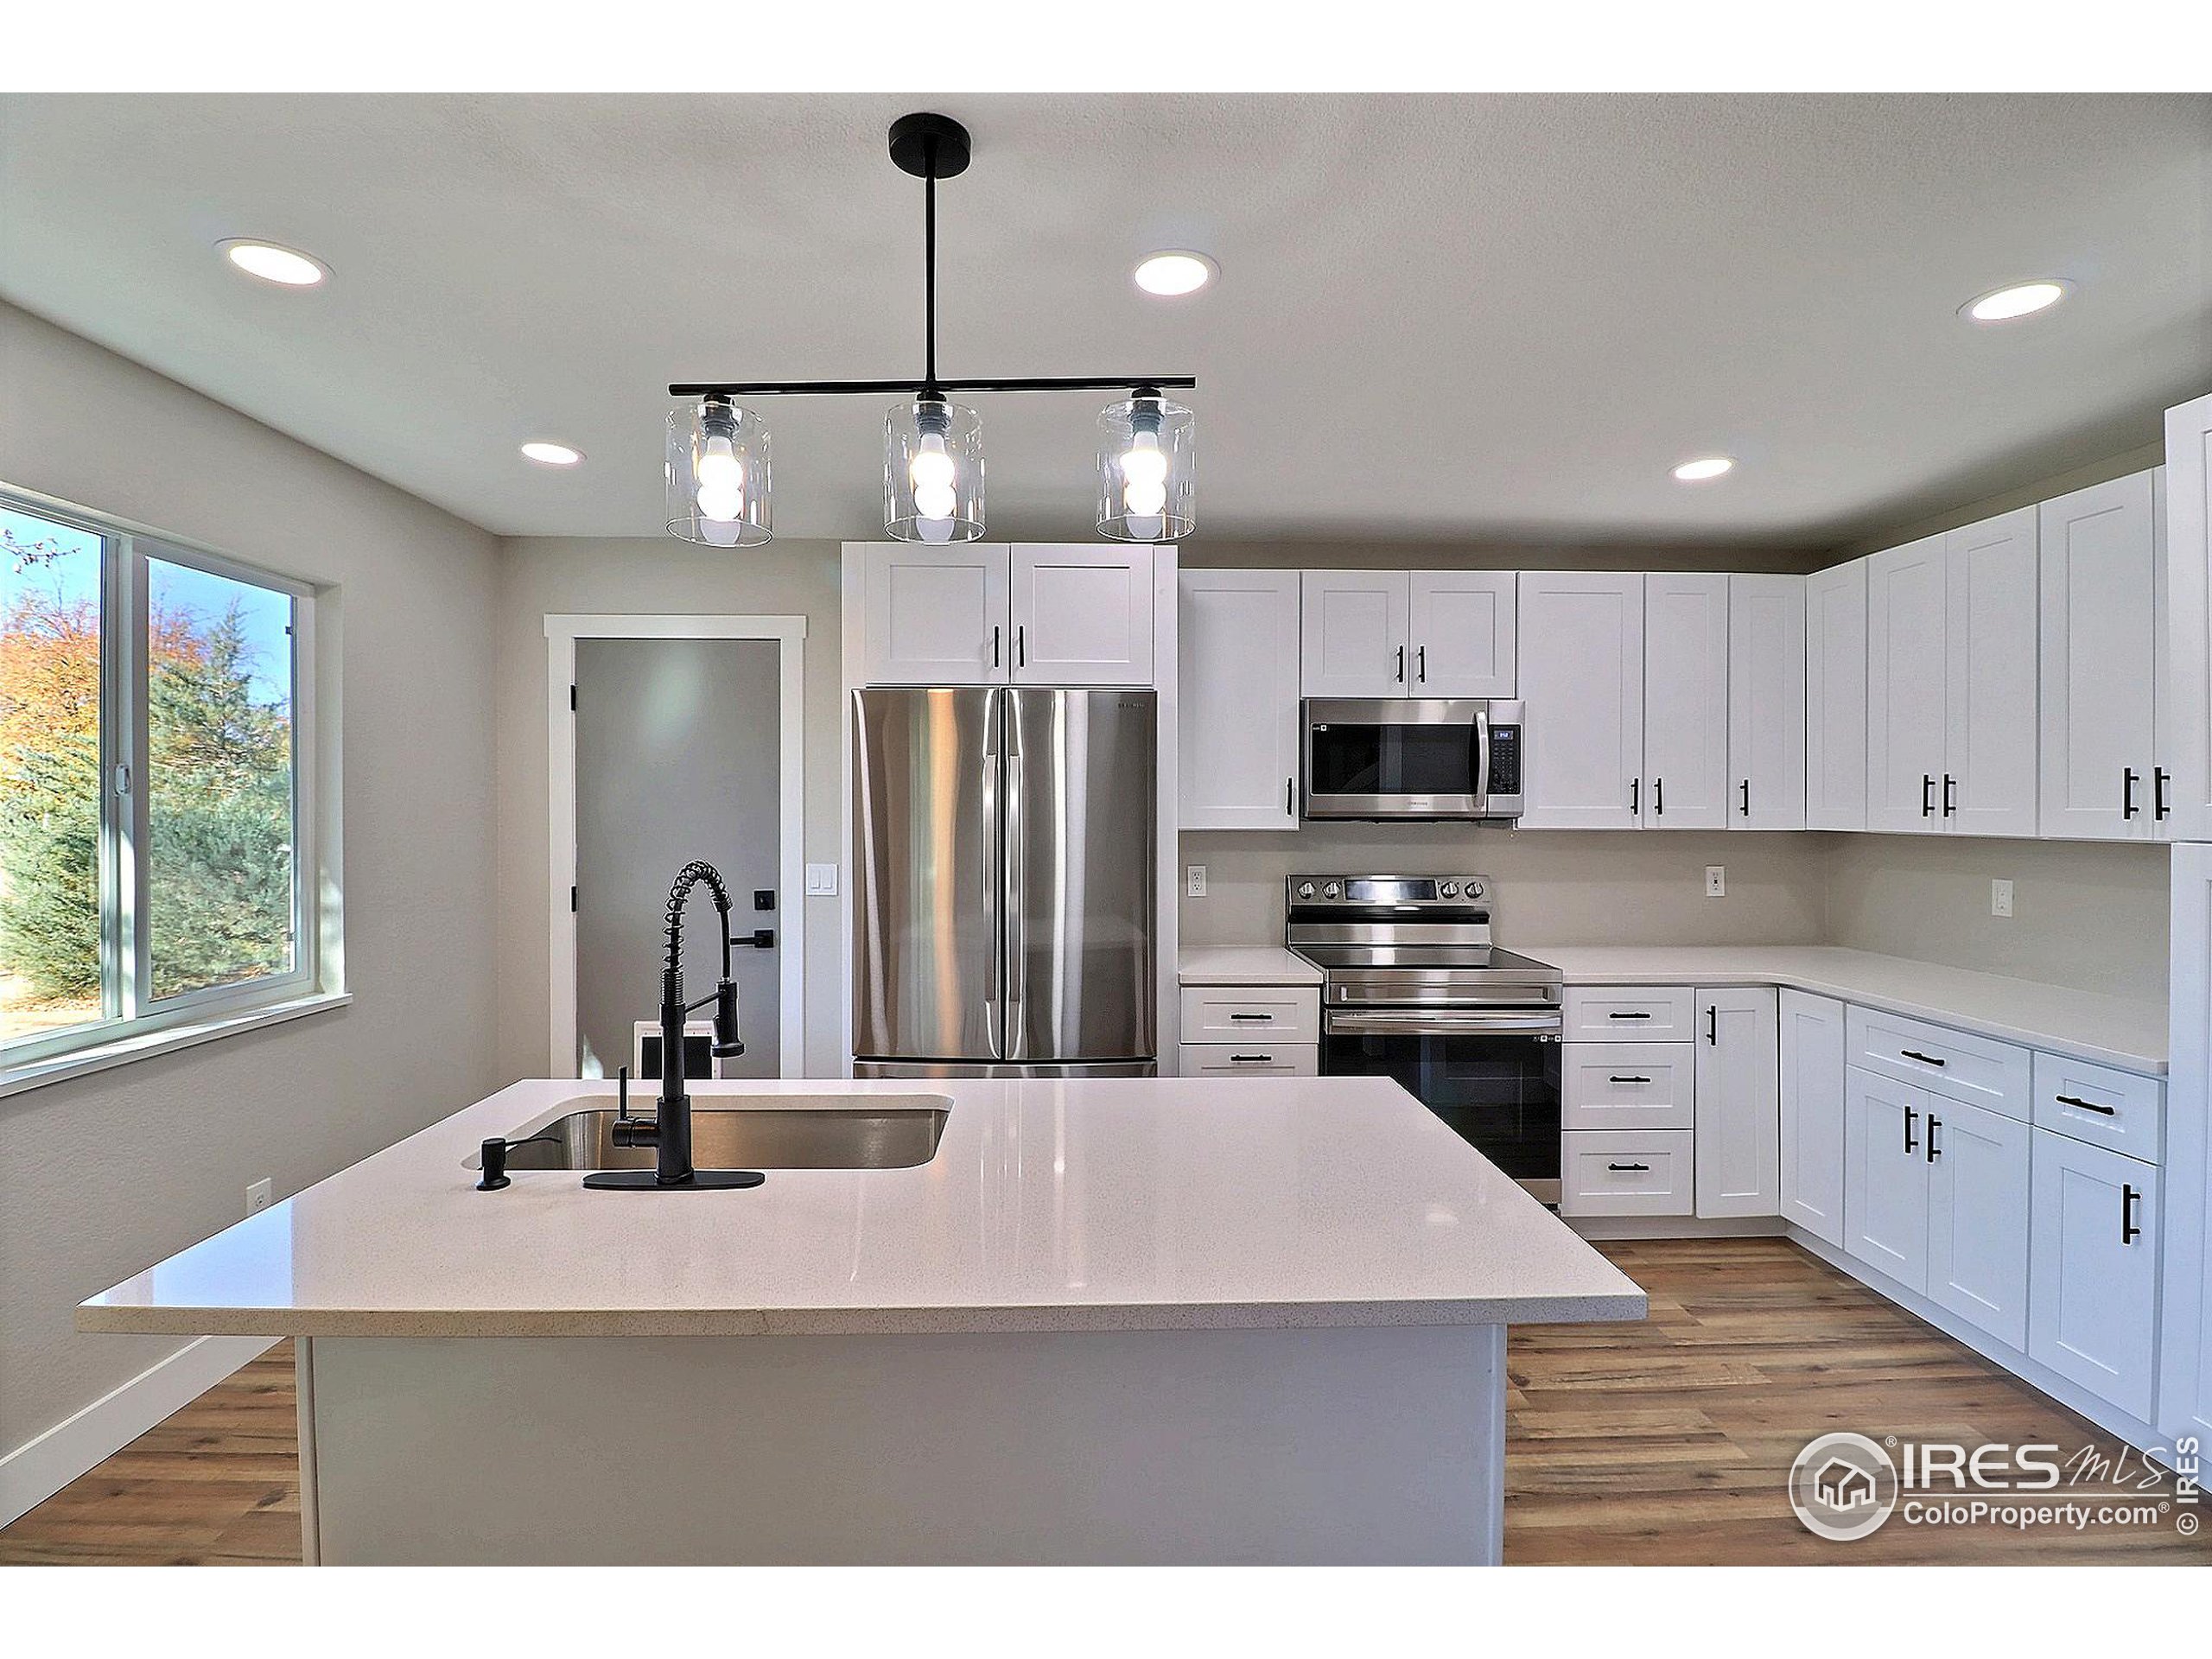 a kitchen with kitchen island a sink stainless steel appliances and window